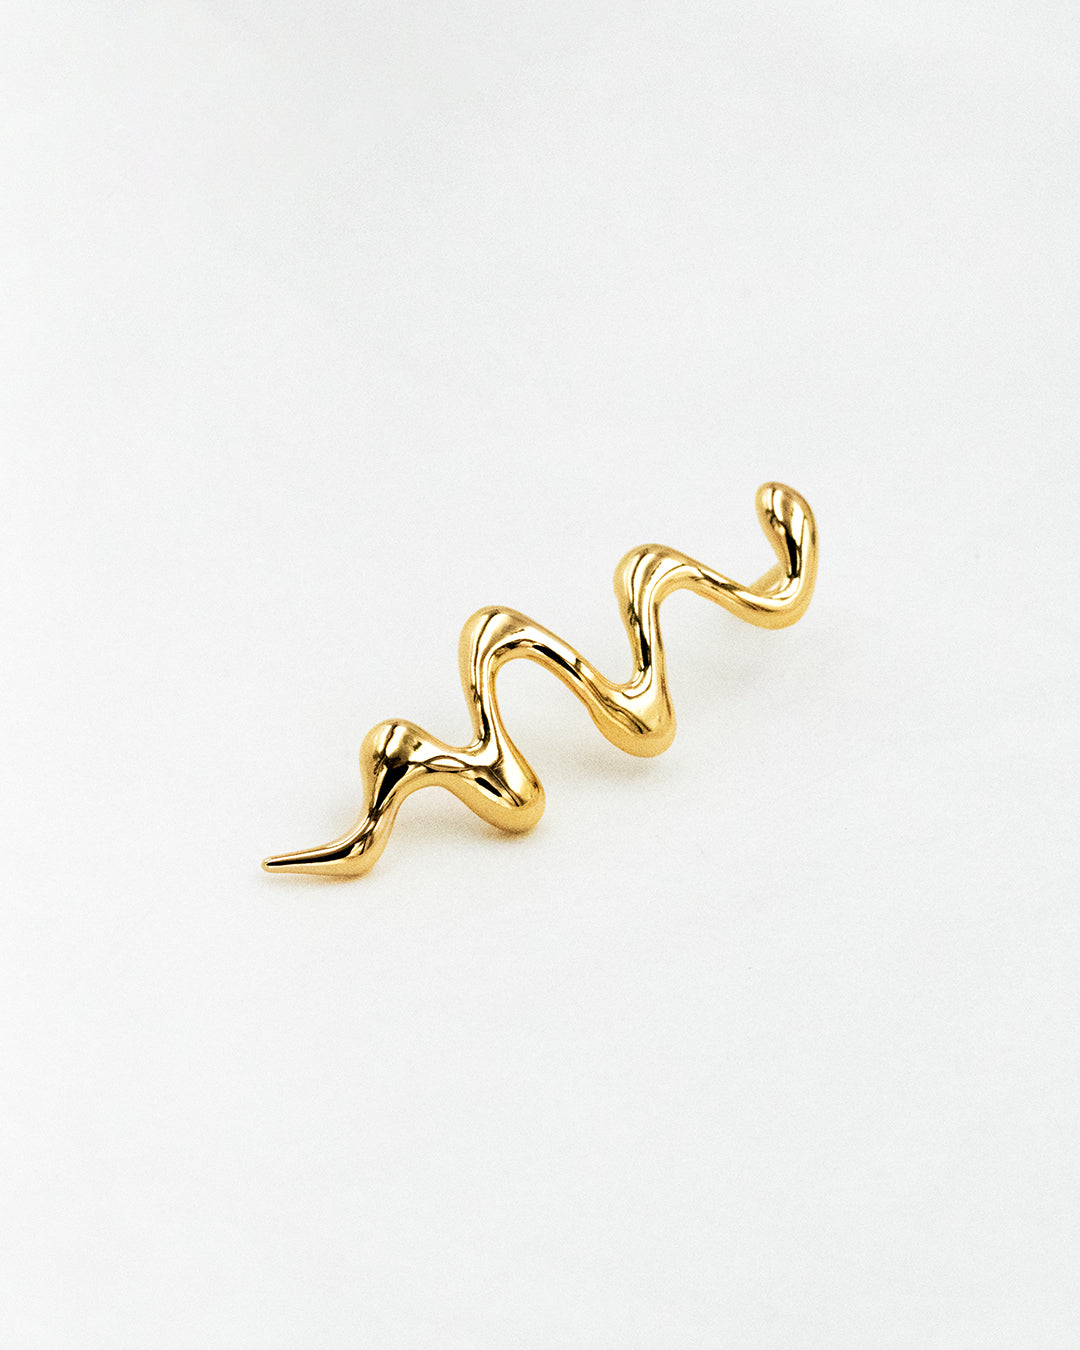 IDAMARI Alda Wave Pin in 18k Gold plated Sterling Silver available at Lahn.shop